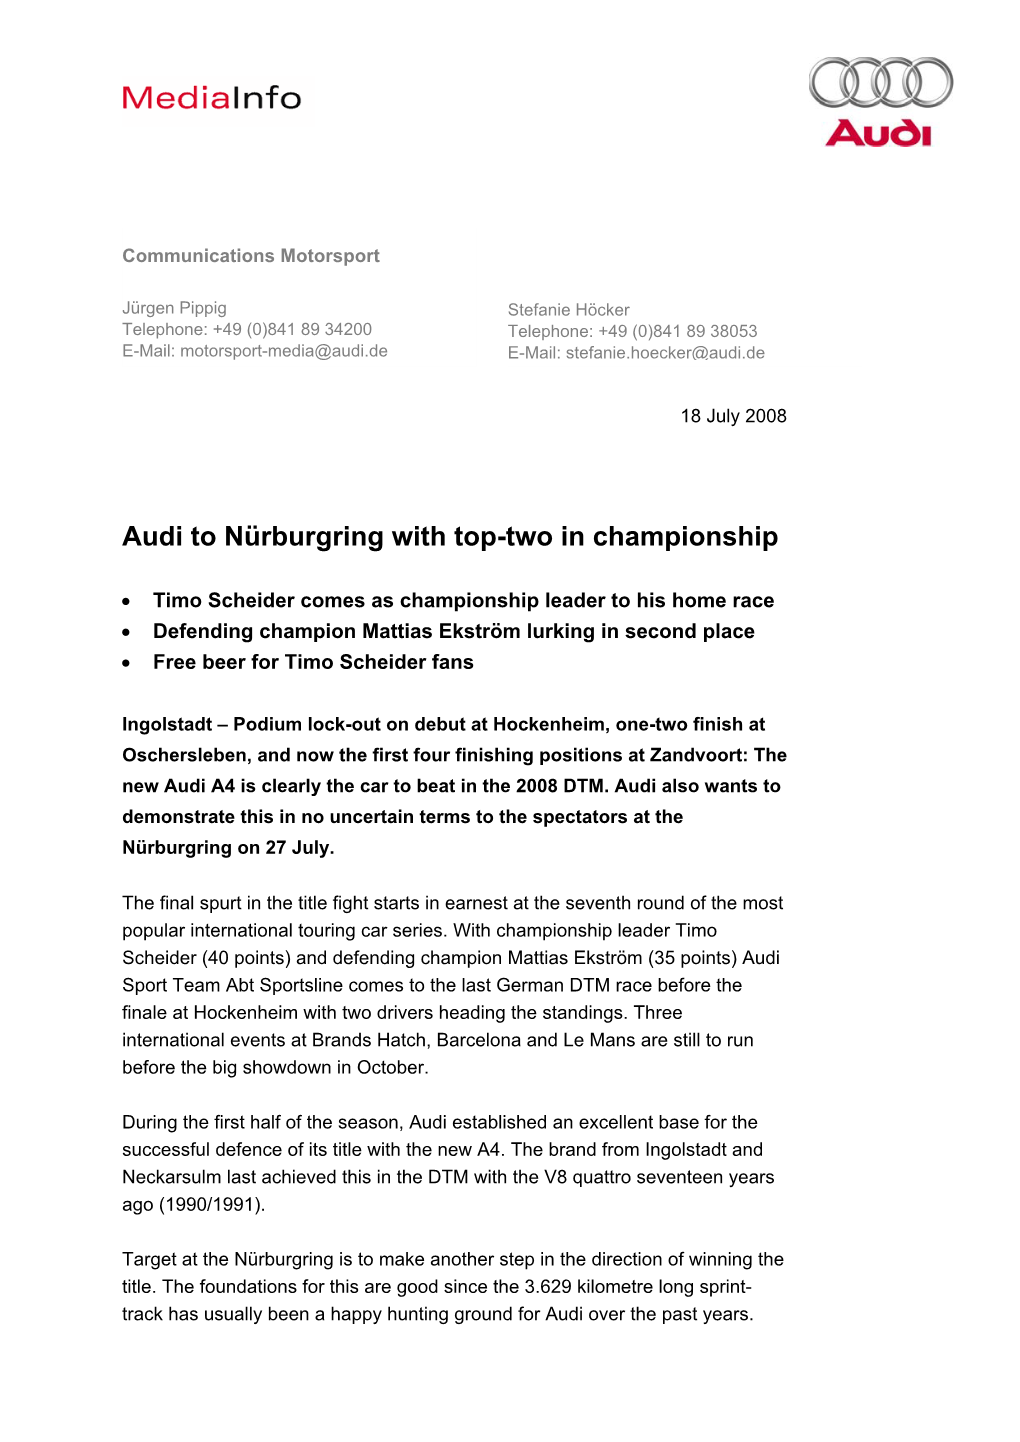 Audi to Nürburgring with Top-Two in Championship